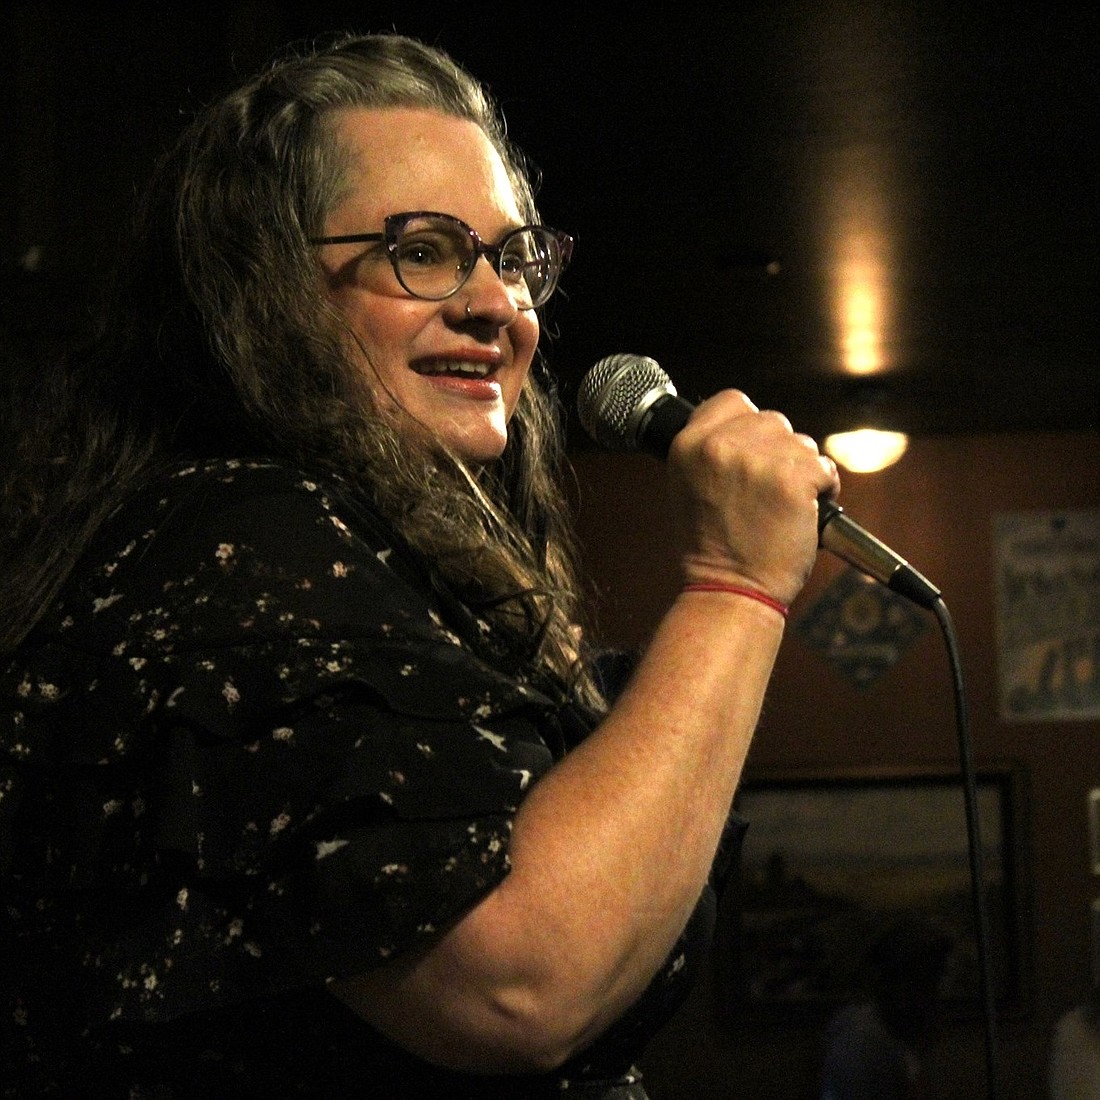 Since she started performing comedy at an open mic in Bellingham in 2017, Nikki Kilpatrick has embraced the art form, and is now producing shows at venues in Bellingham and Birch Bay.